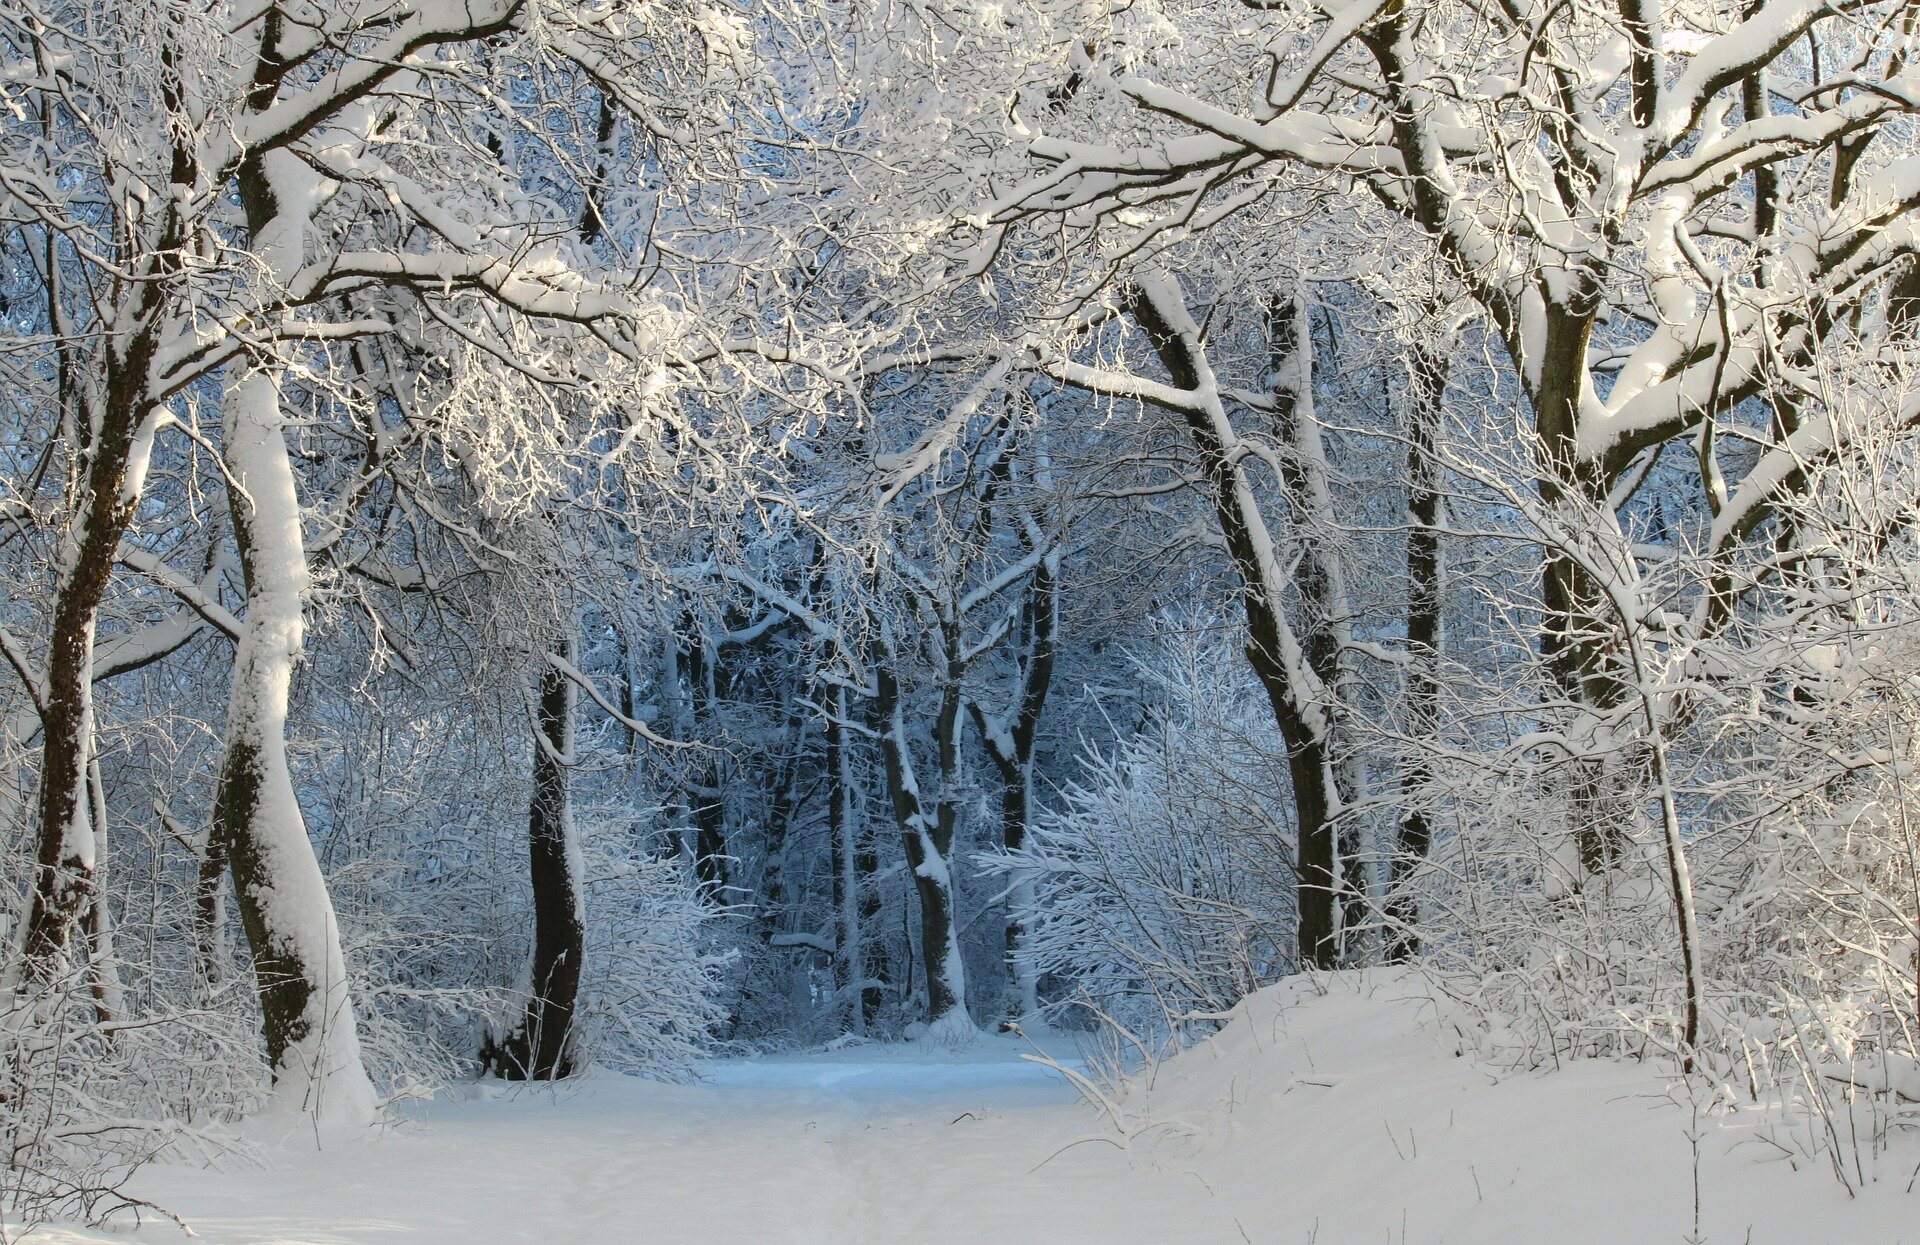 The real benefits of walking in a winter wonderland